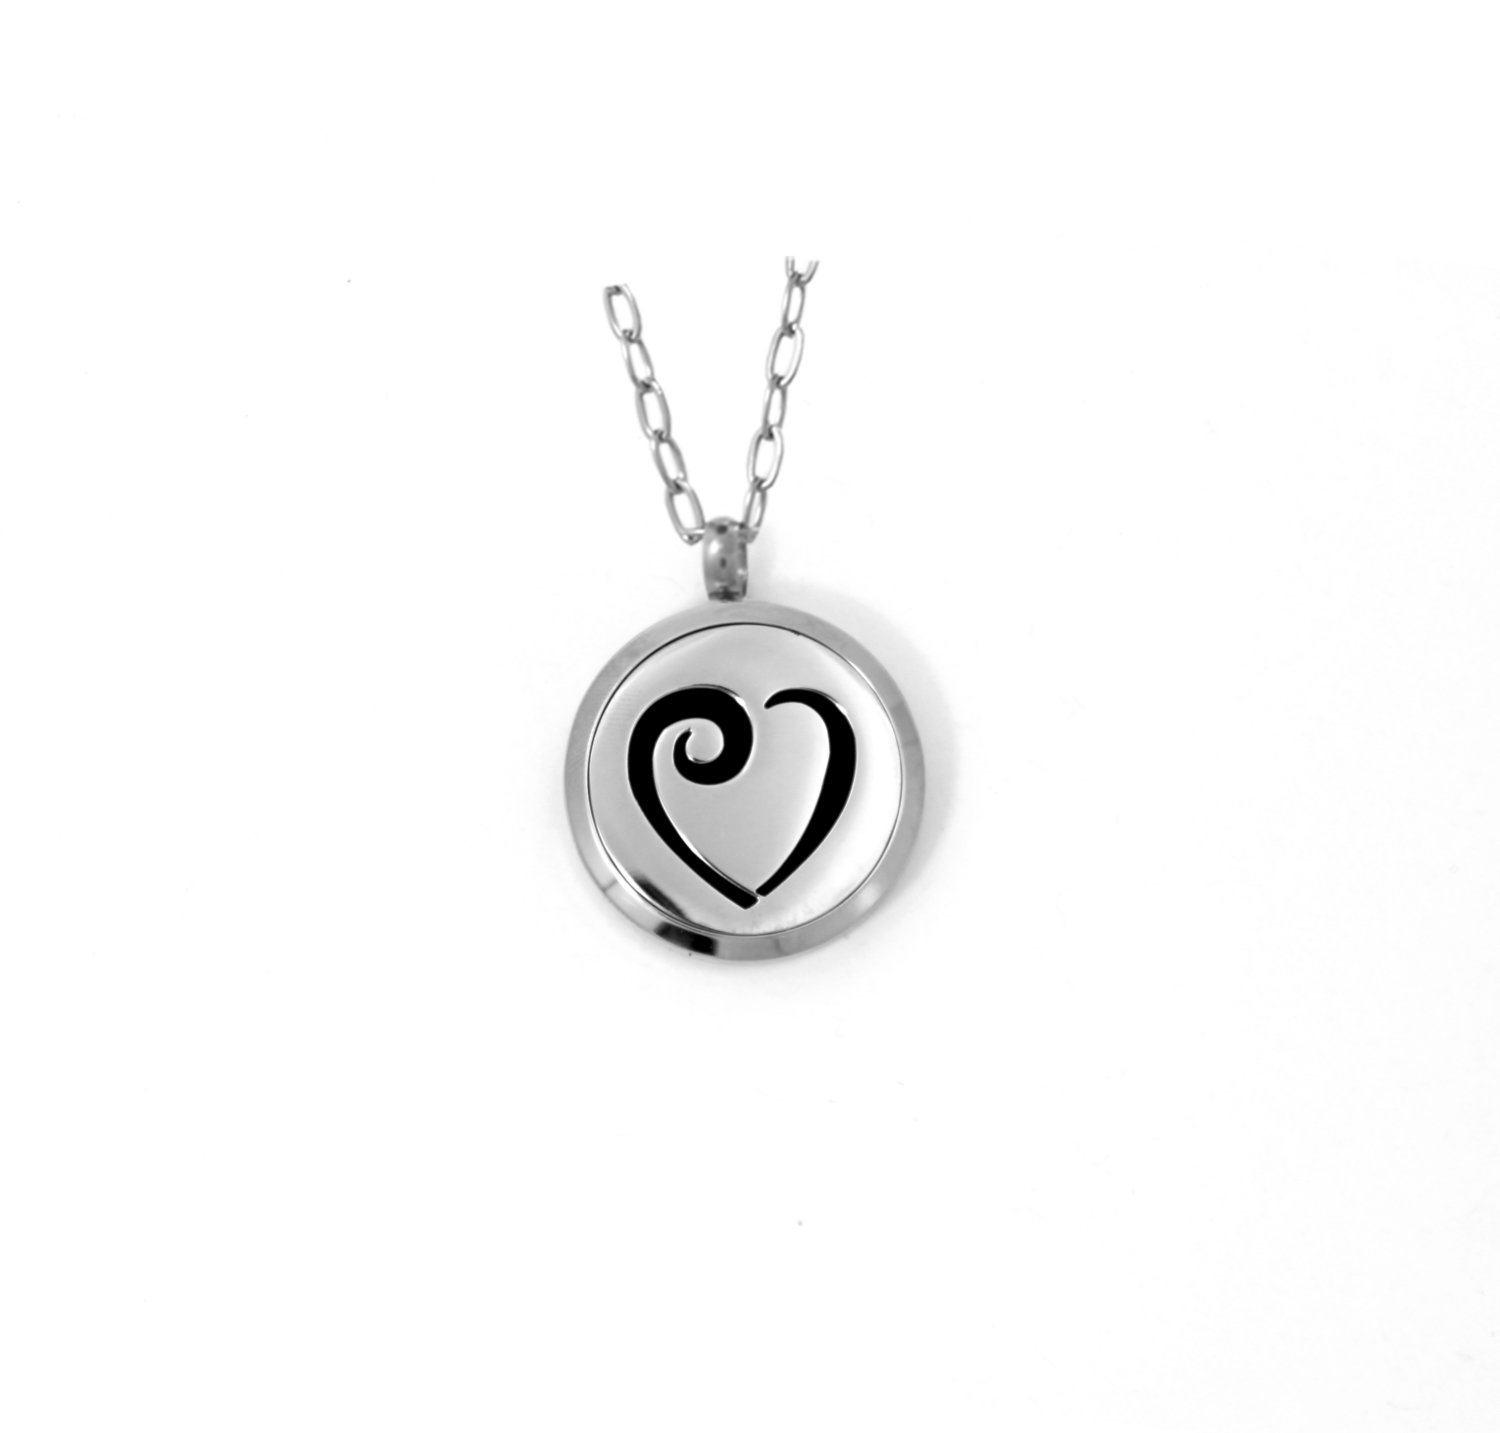 Diffusing Magnetic Heart Pendant - includes Two Leather Inserts